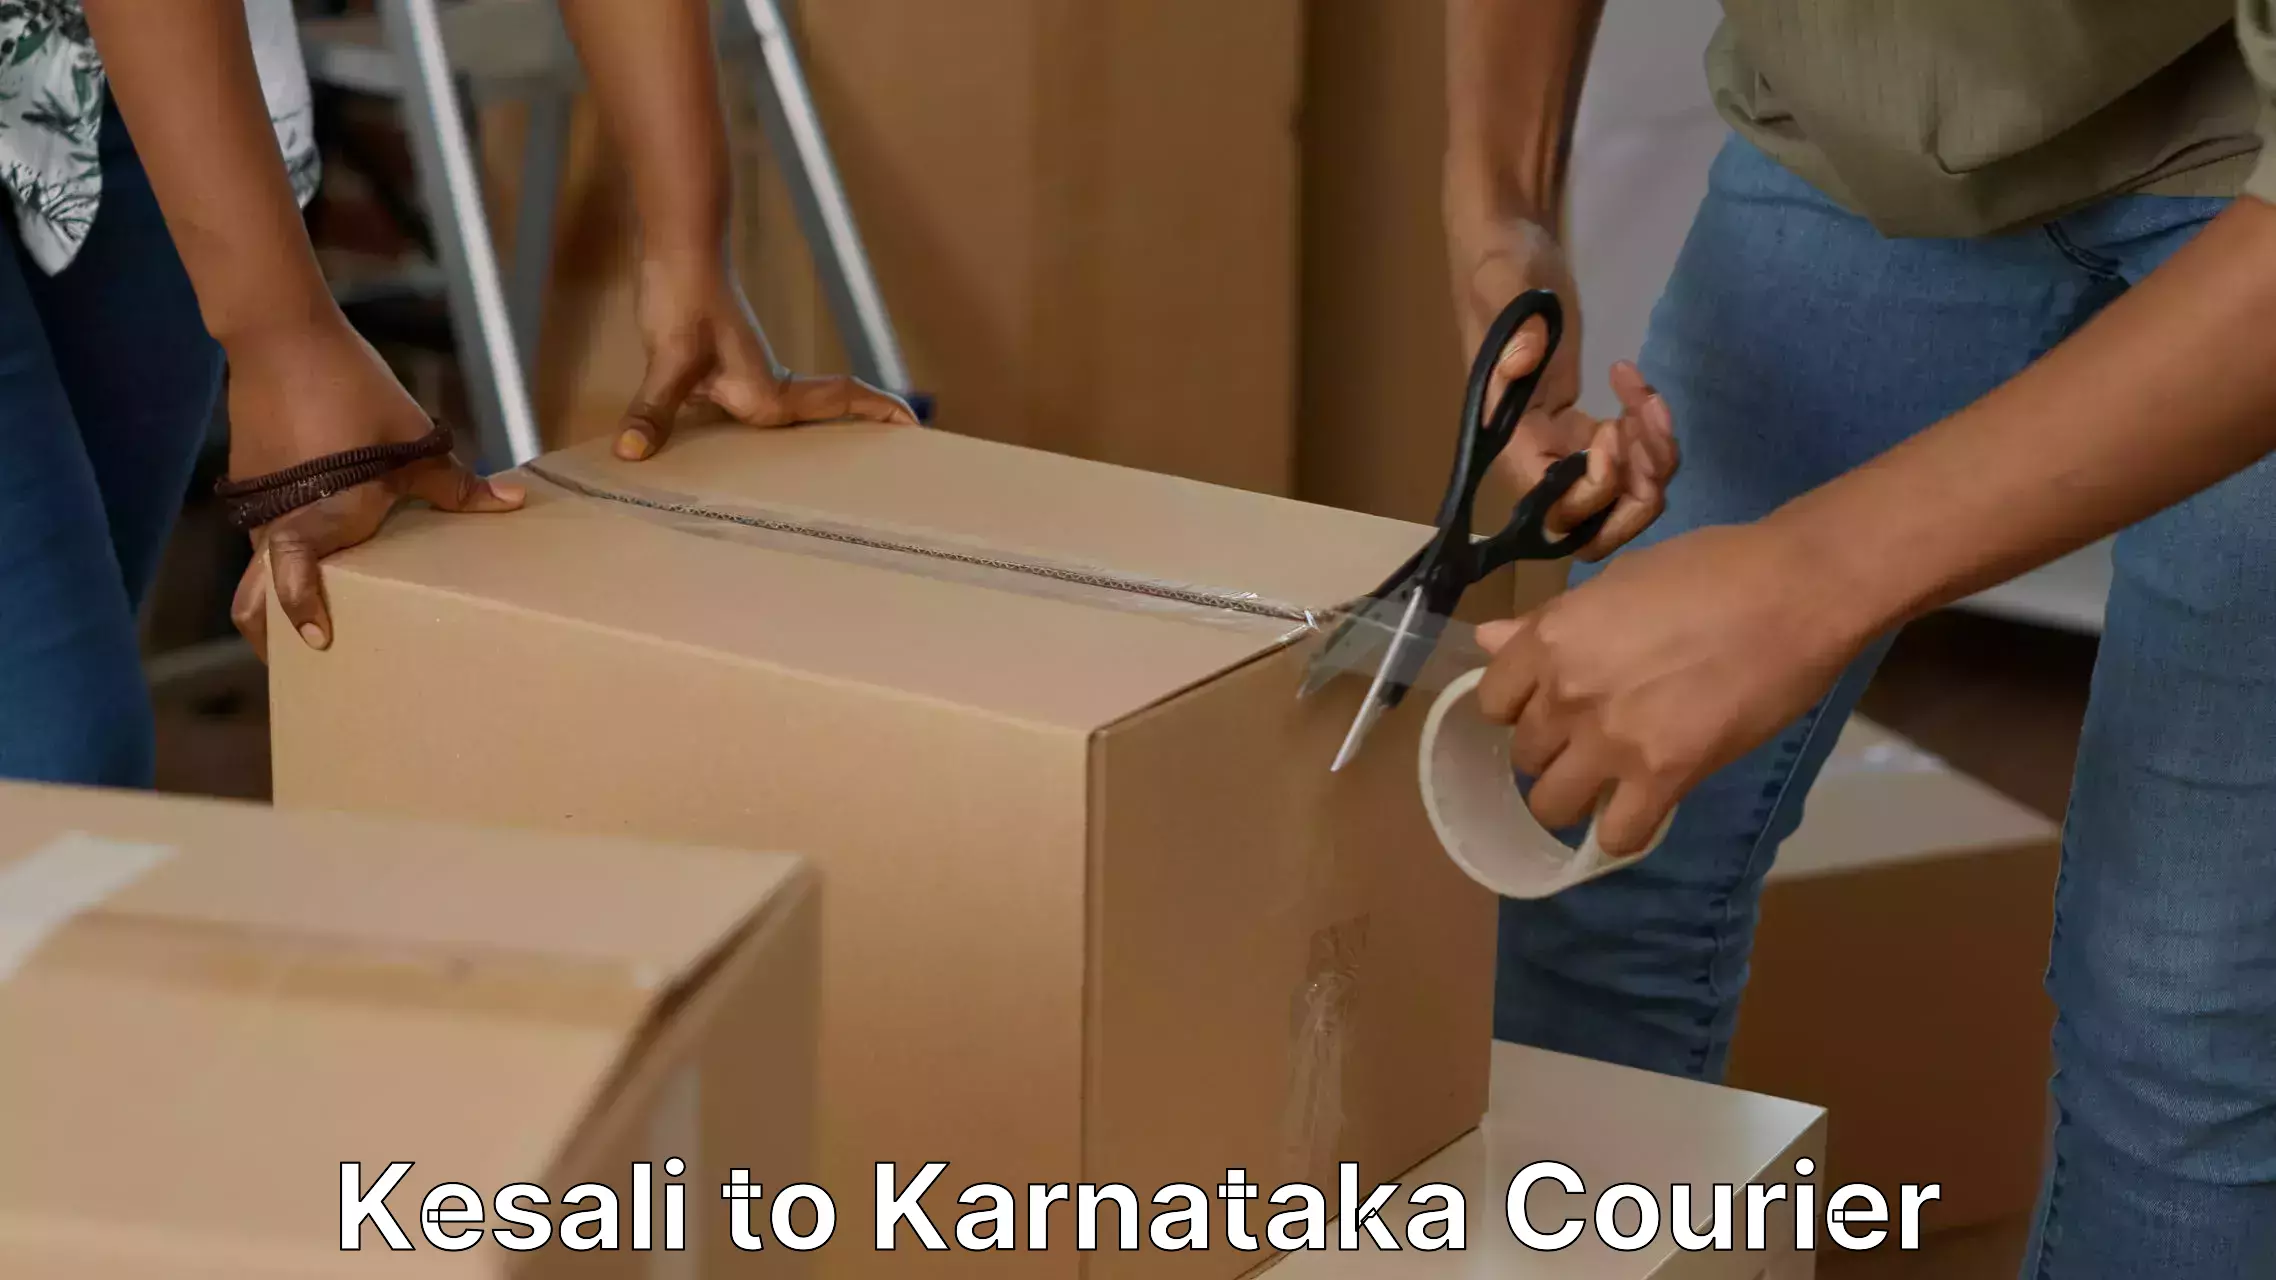 Efficient home movers Kesali to Bangalore